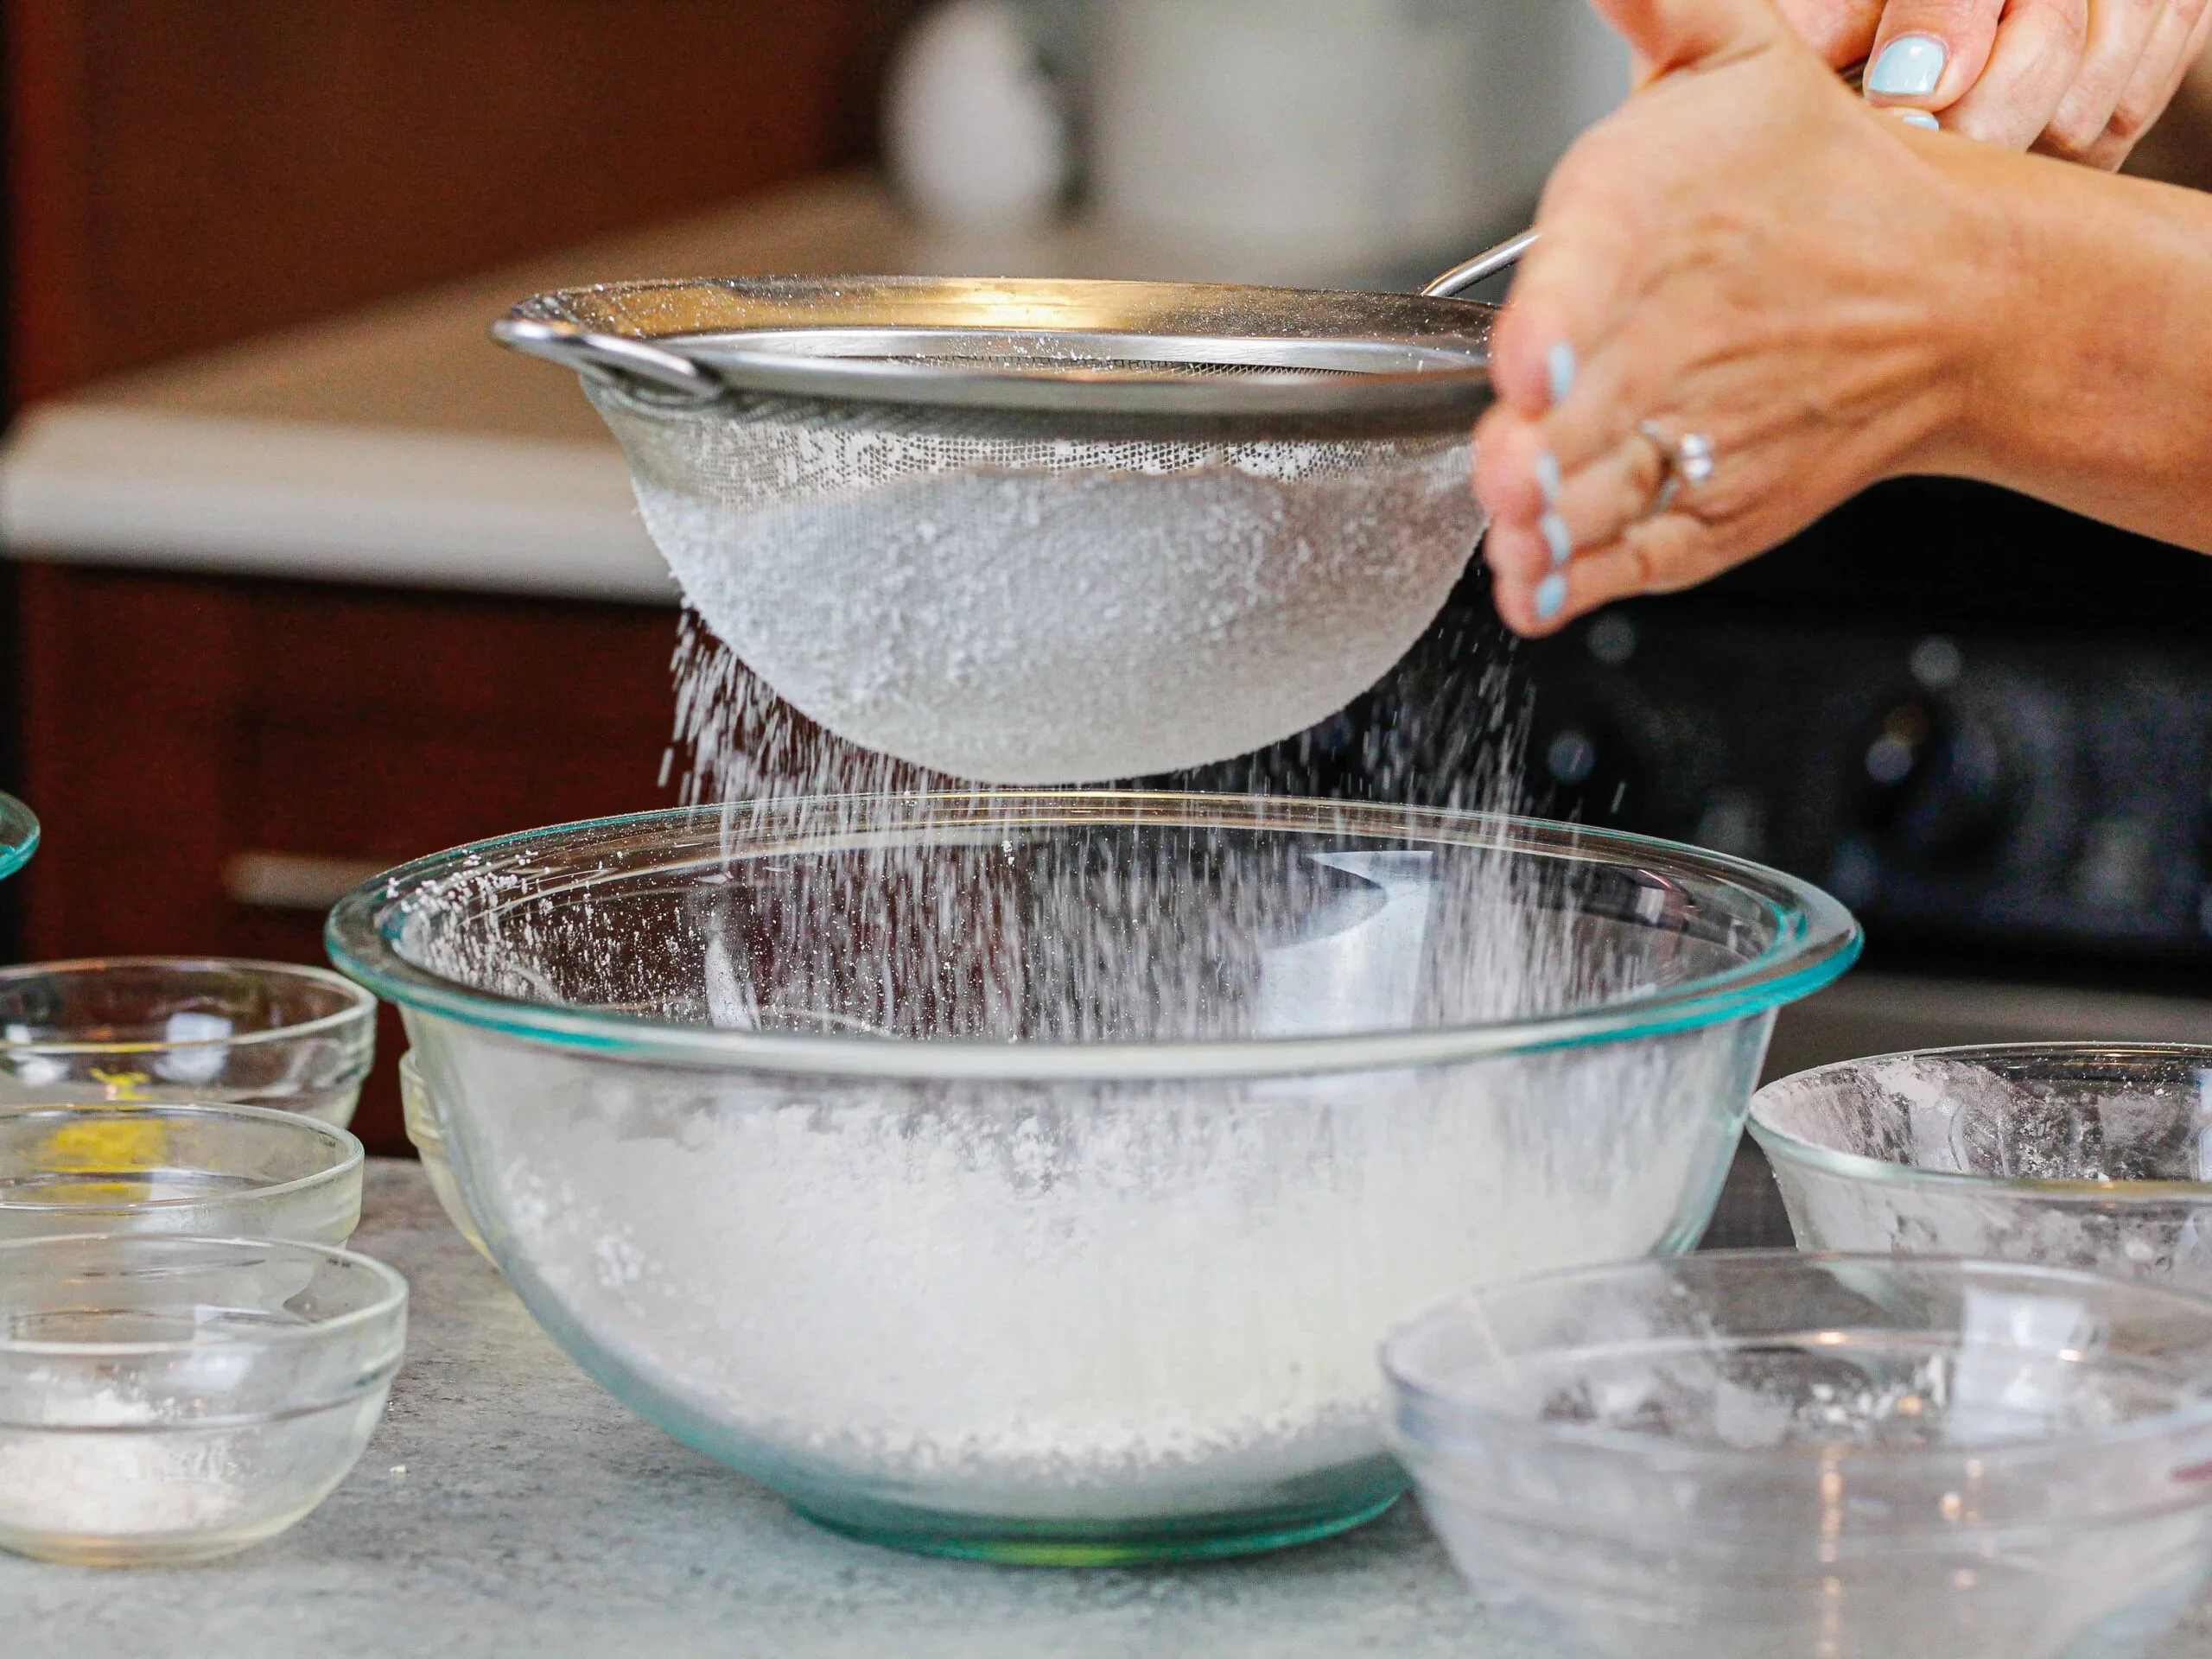 image of dry ingredients being sifted into bowl to make french macarons